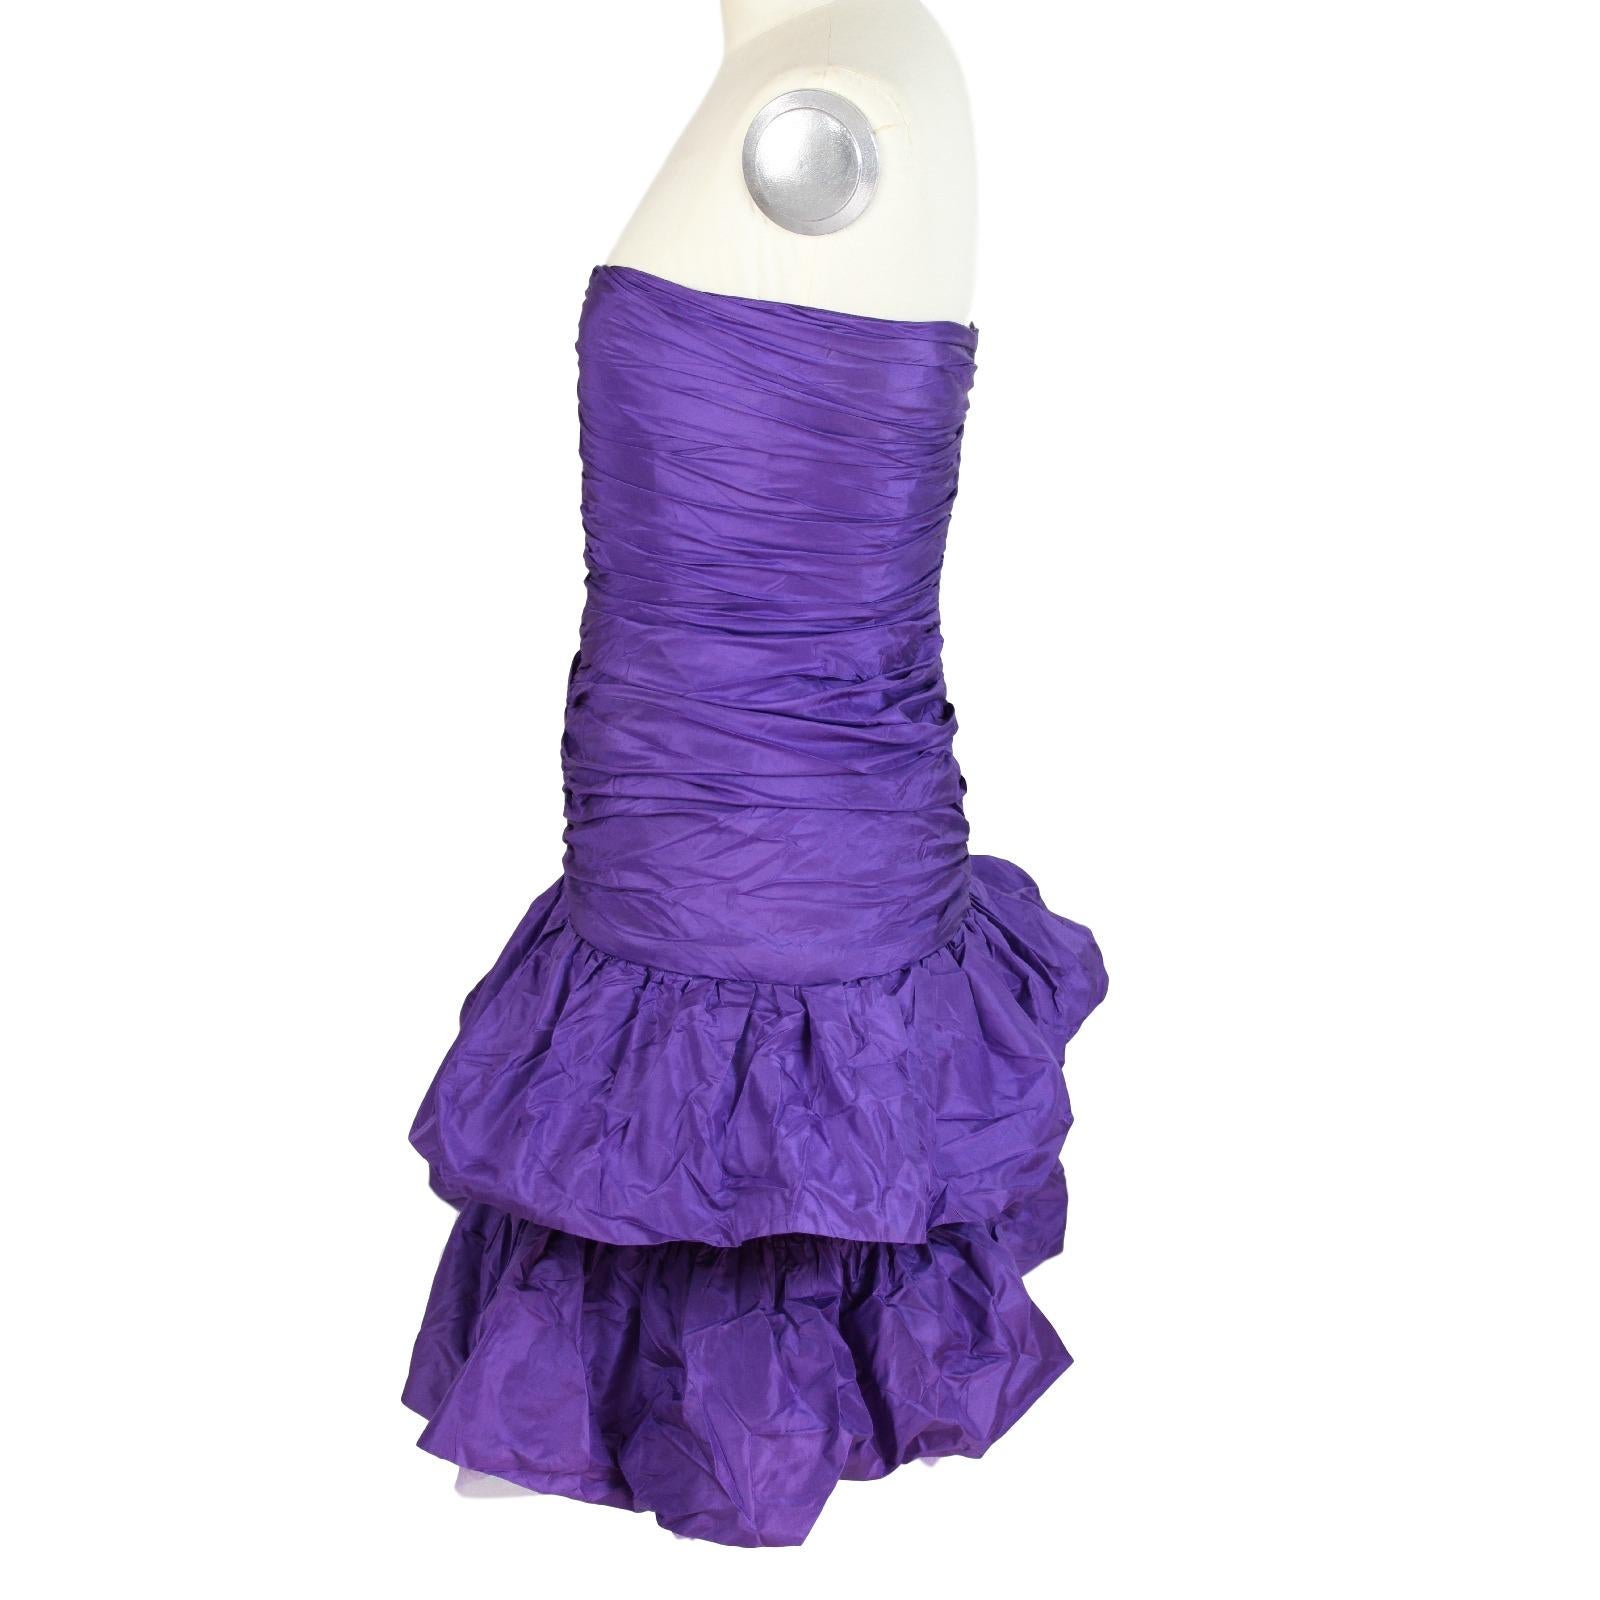 Rosanna Manzoni strapless purple vintage dress, made in Italy. the double layer skirt is balloon. Excellent conditions.
Dress is a size 44 as a label, but dresses a small one 42

SIZE 44 IT 10 US 12 UK

Bust / chest: 35 cm
Length: 76 cm